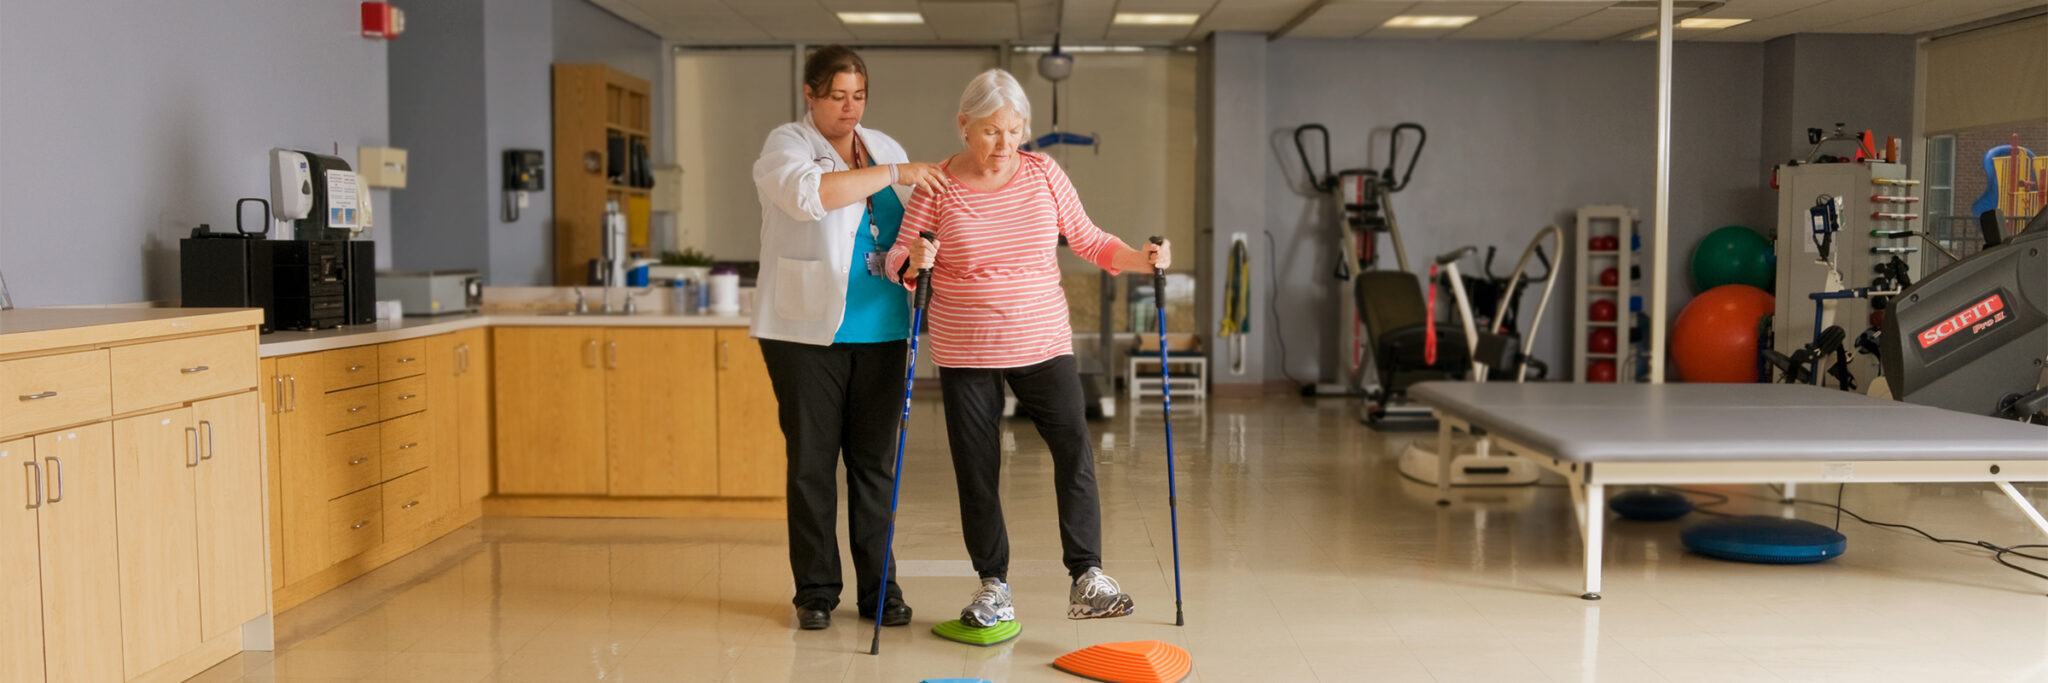 Physical therapist assisting patient with Outpatient Neurological Physical Therapy exercise